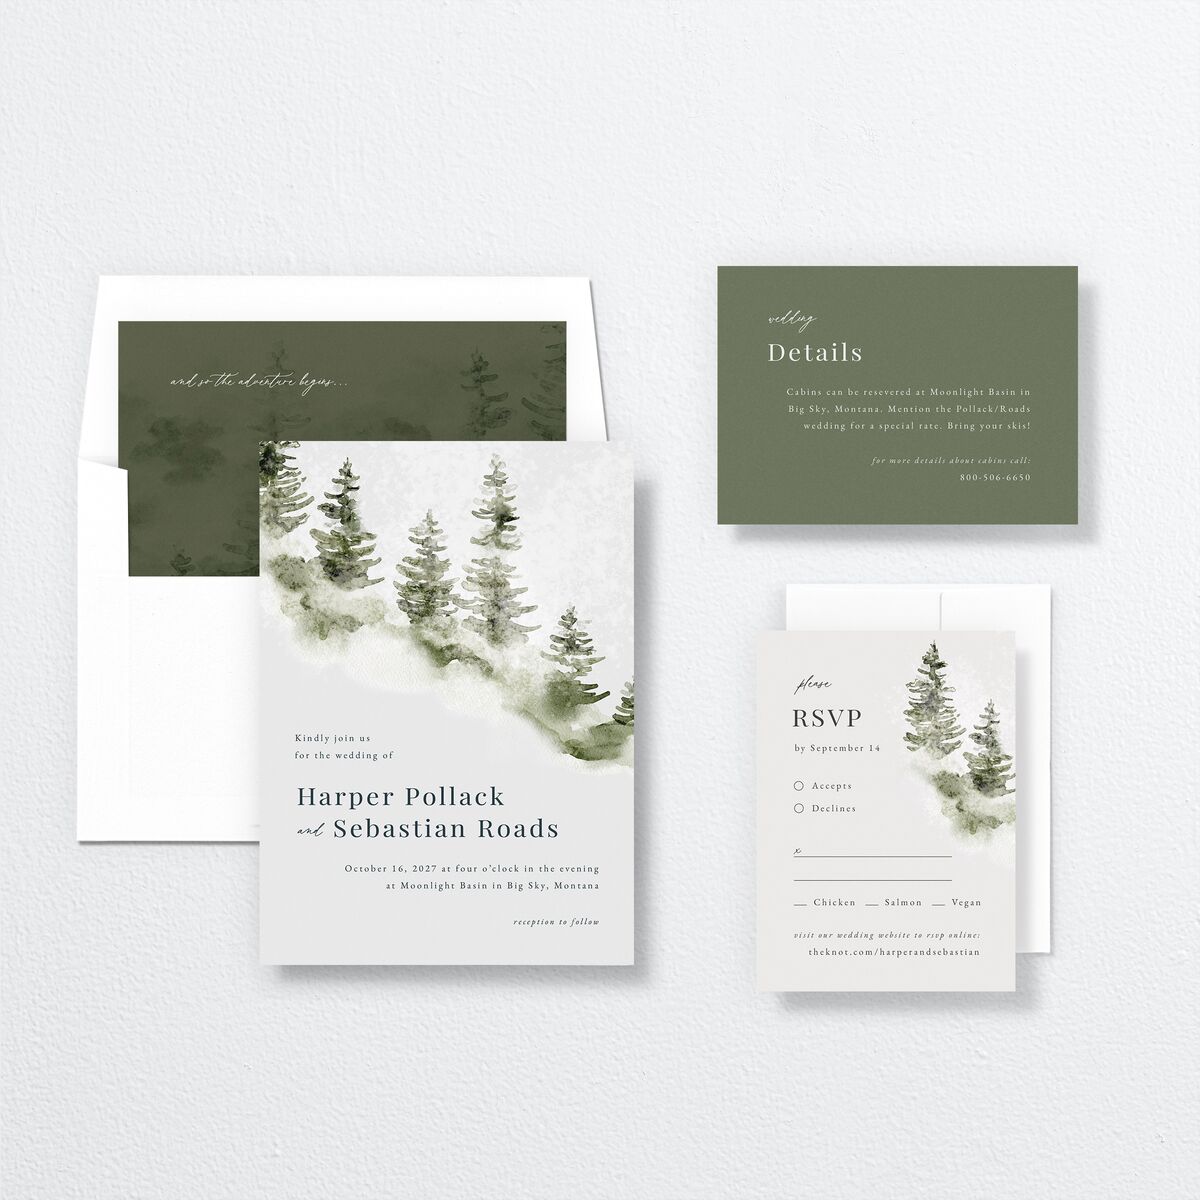 Snowy Mountainside Wedding Invitations suite